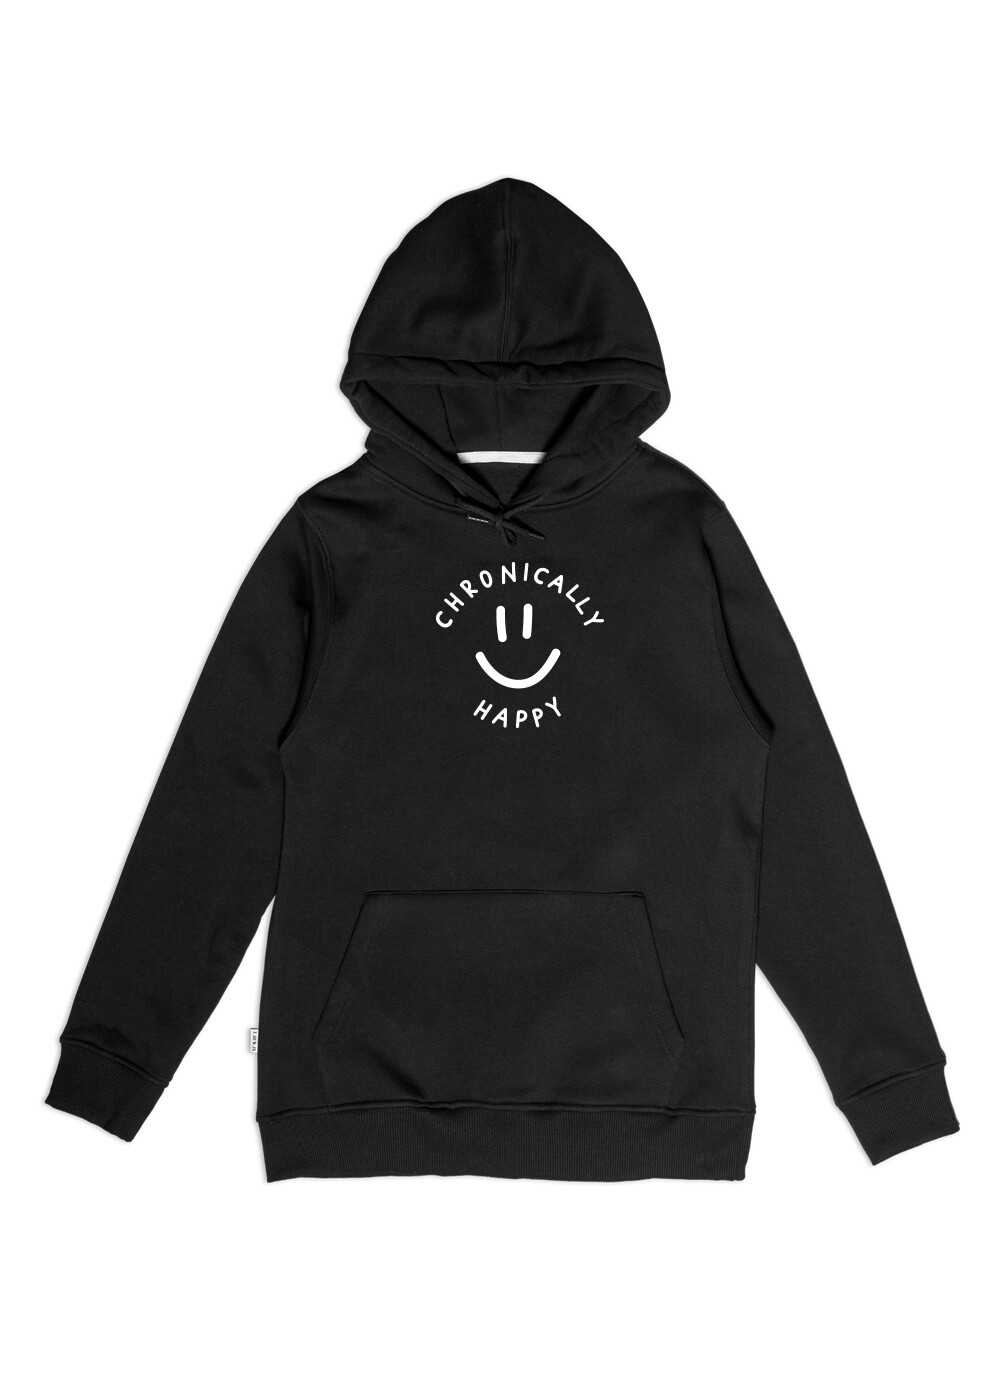 Aight* Hoodie - "Chronically Happy" black white